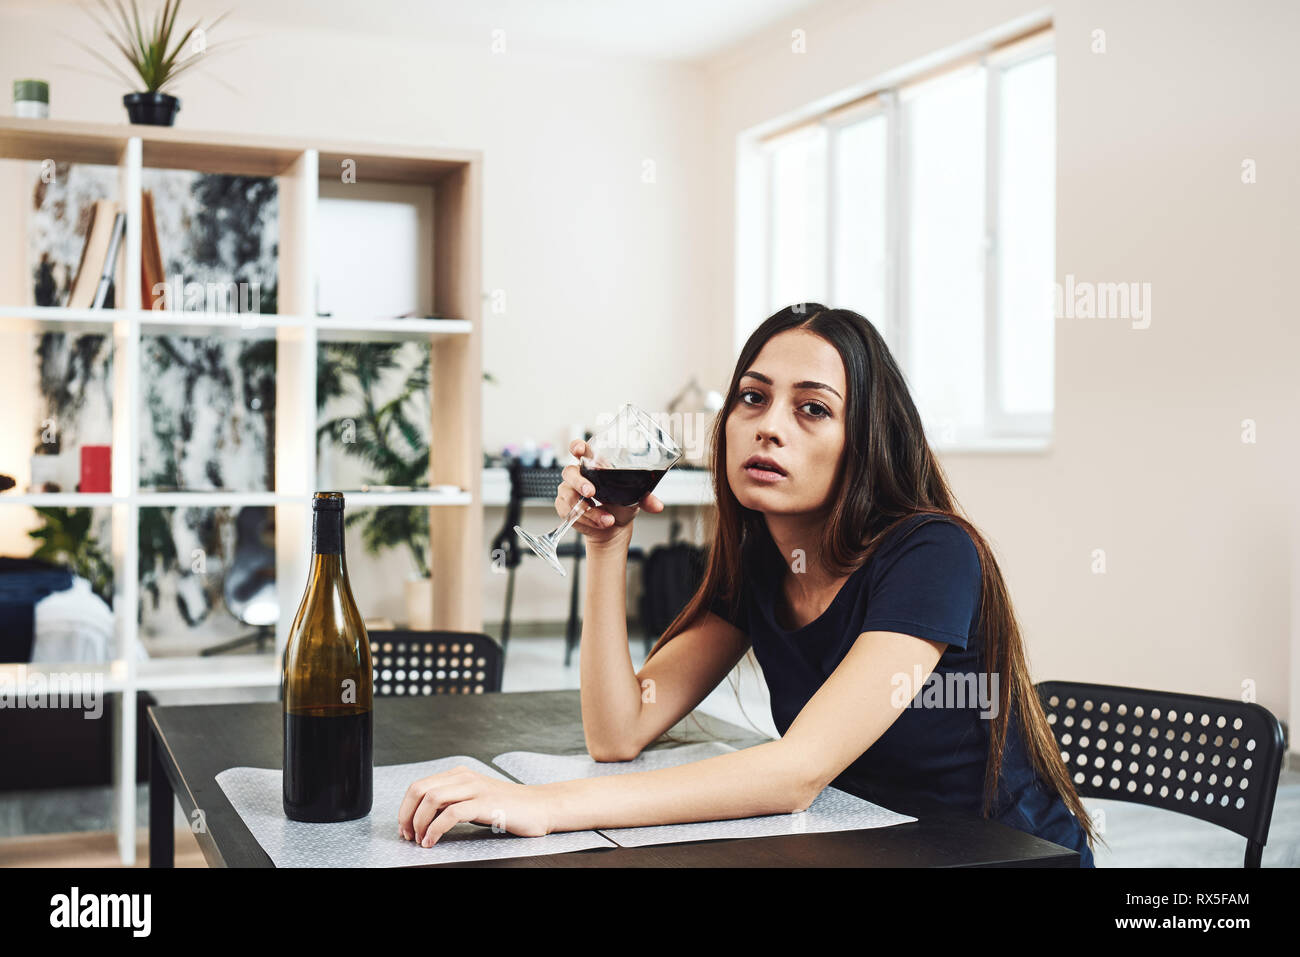 Depressed, divorced woman sitting alone in kitchen at home and holding a glass of red wine because of problems at work and troubles in relationships.  Stock Photo